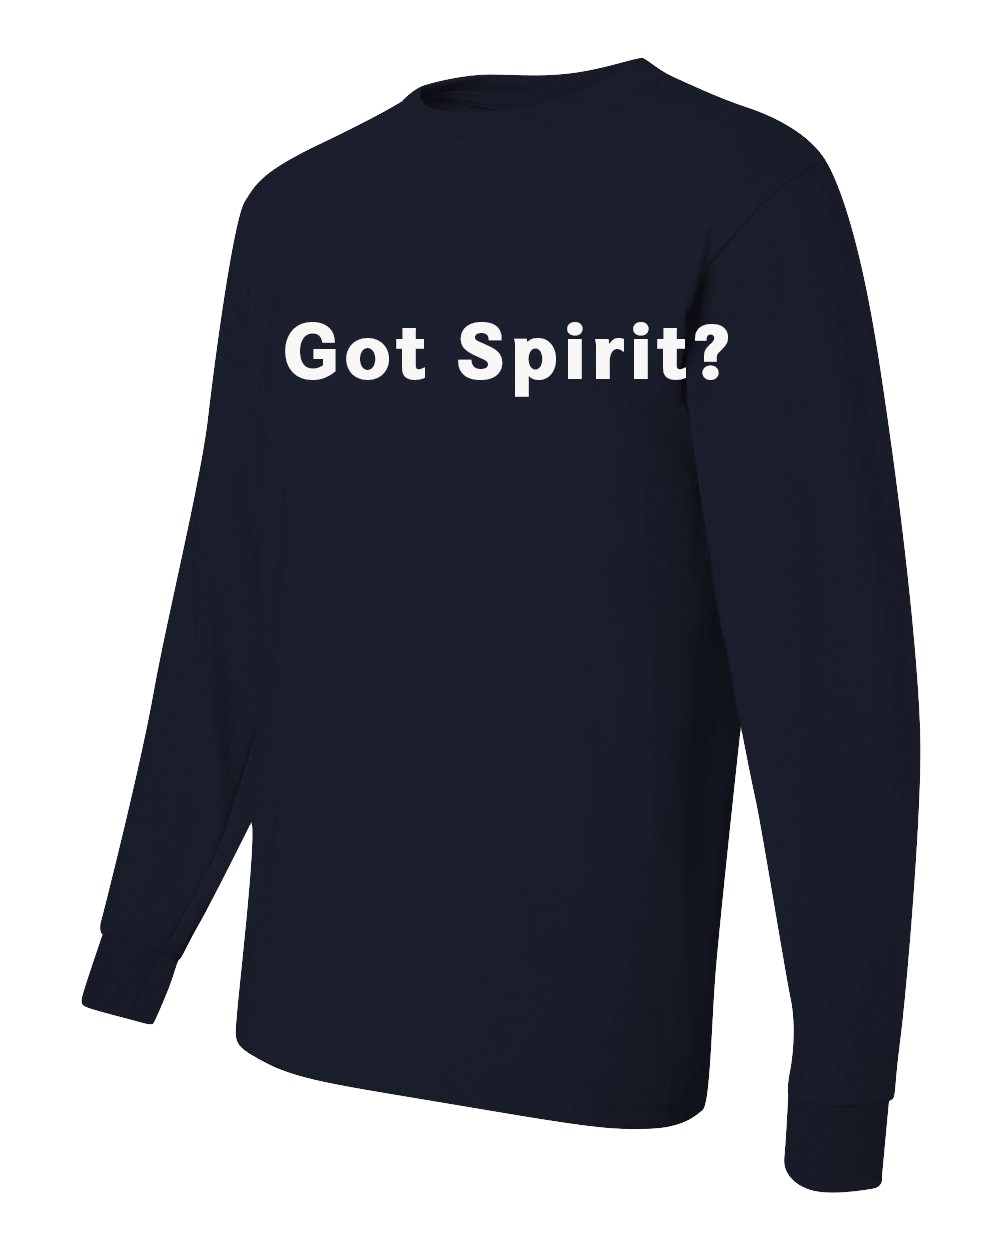 Resurrection L/S "Got Spirit" T-Shirt w/ Logo - Please Allow 2-3 Weeks for Delivery